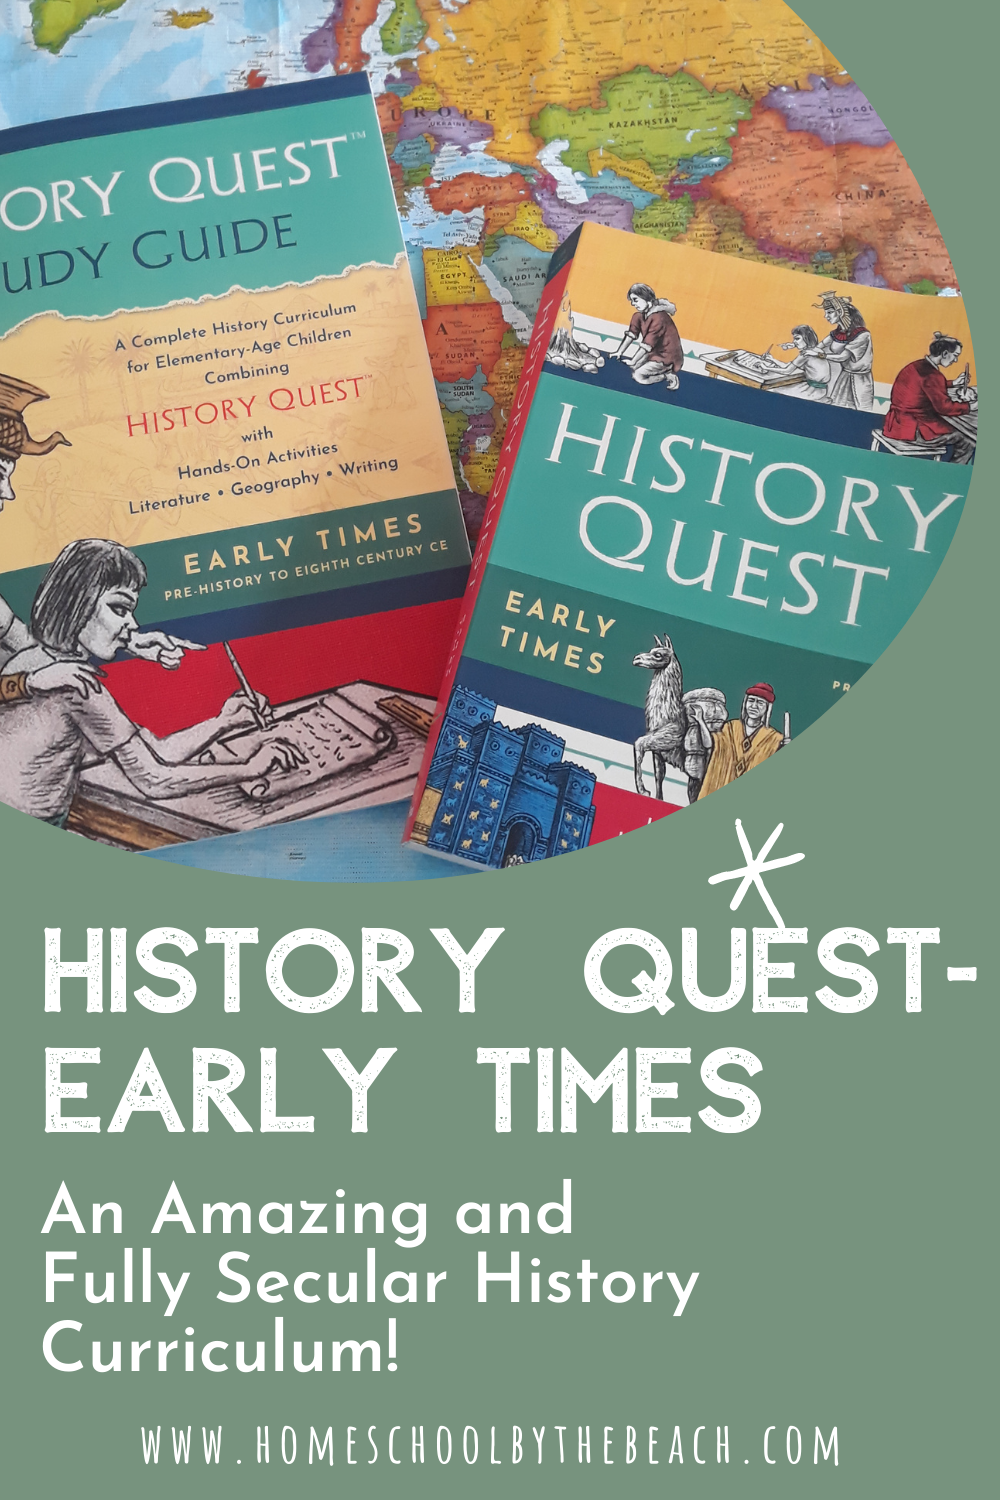 History Quest-Early Times – An Amazing and Fully Secular History Curriculum!